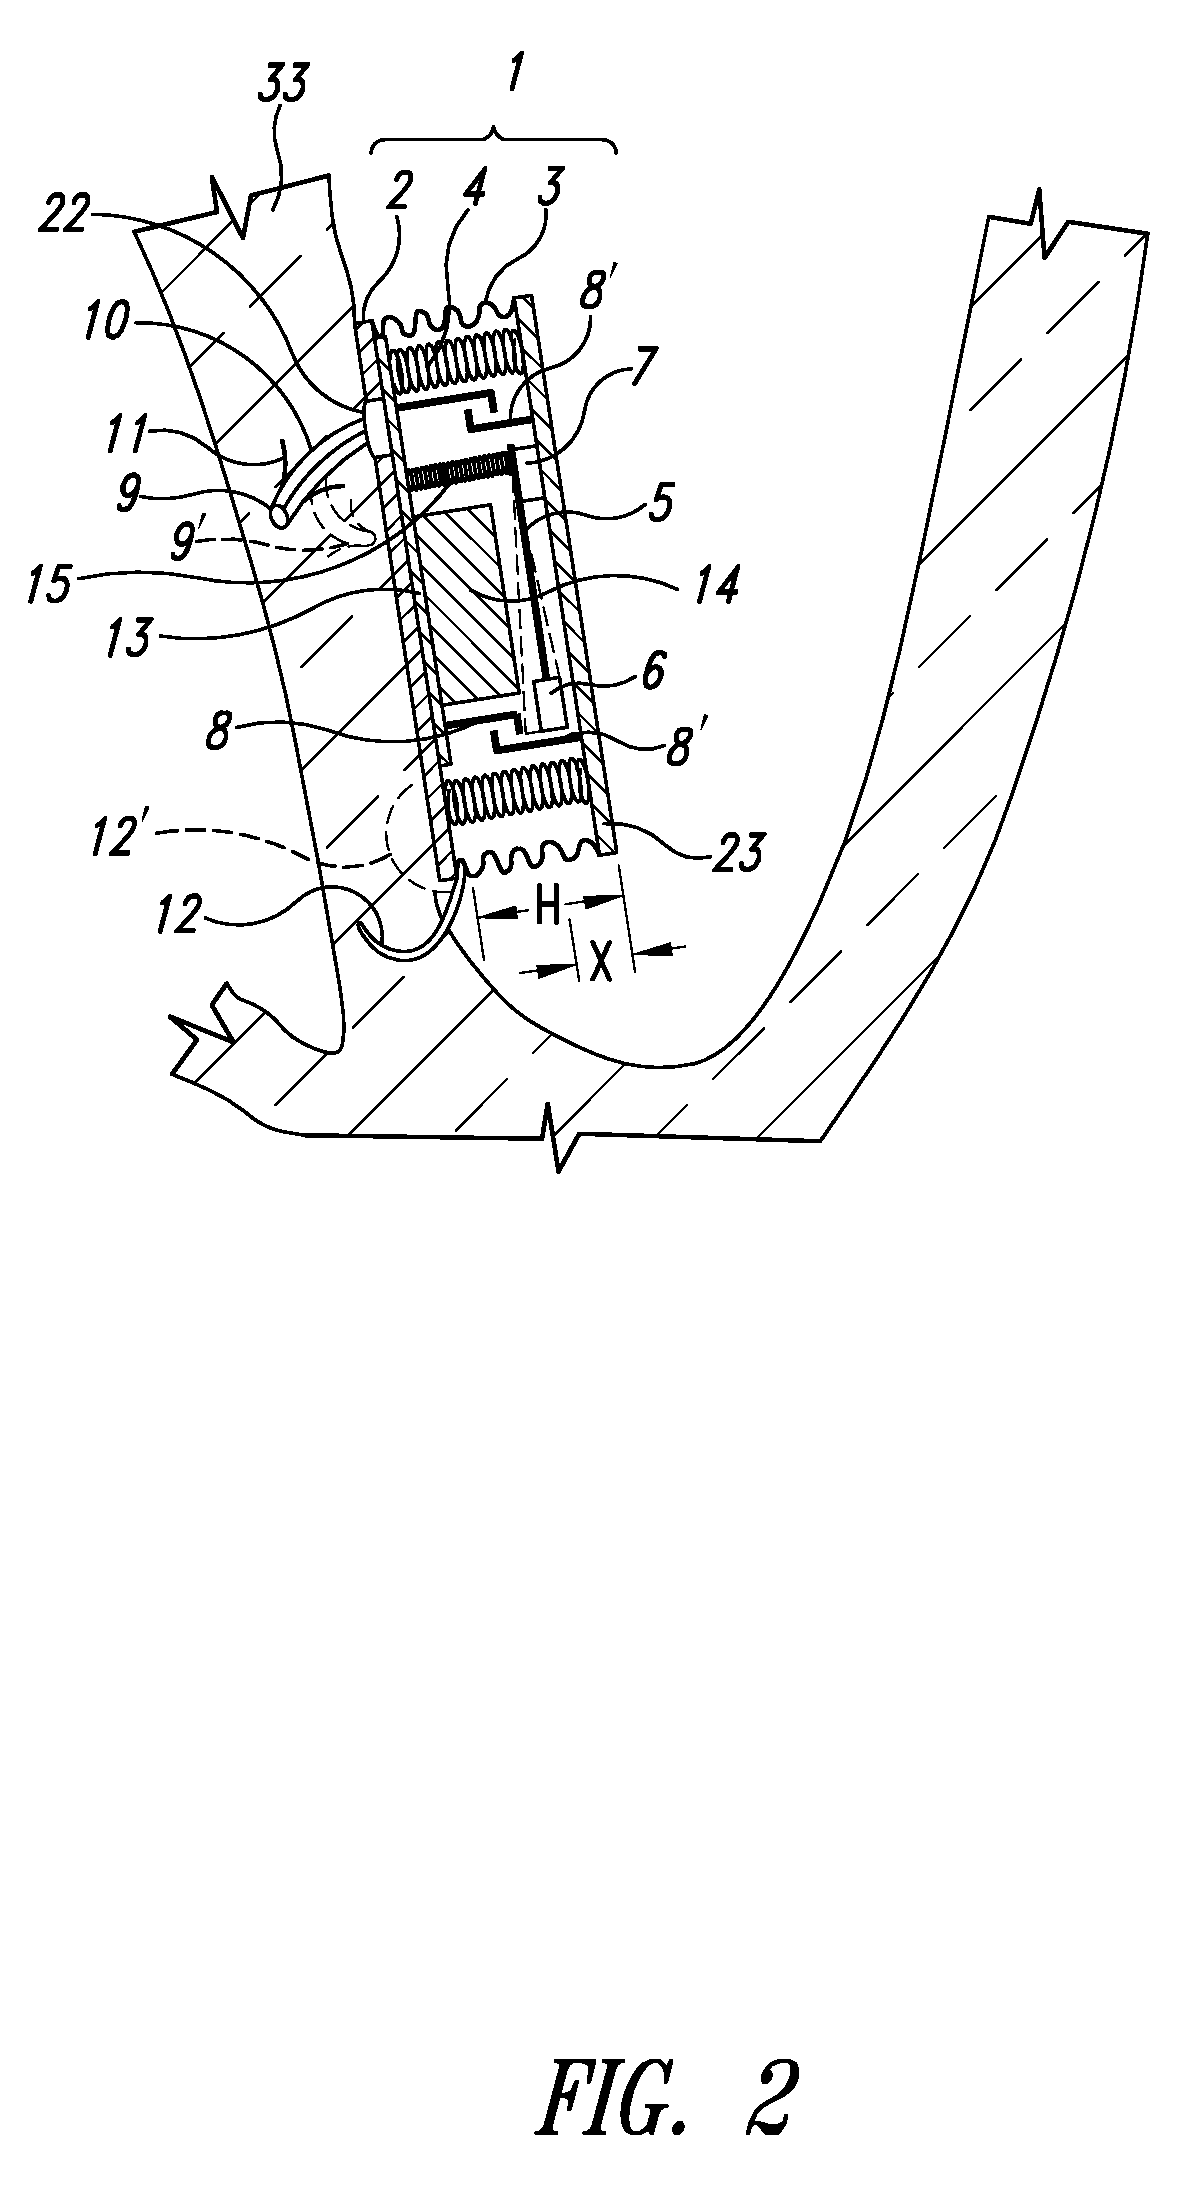 Self-powered resonant leadless pacemaker